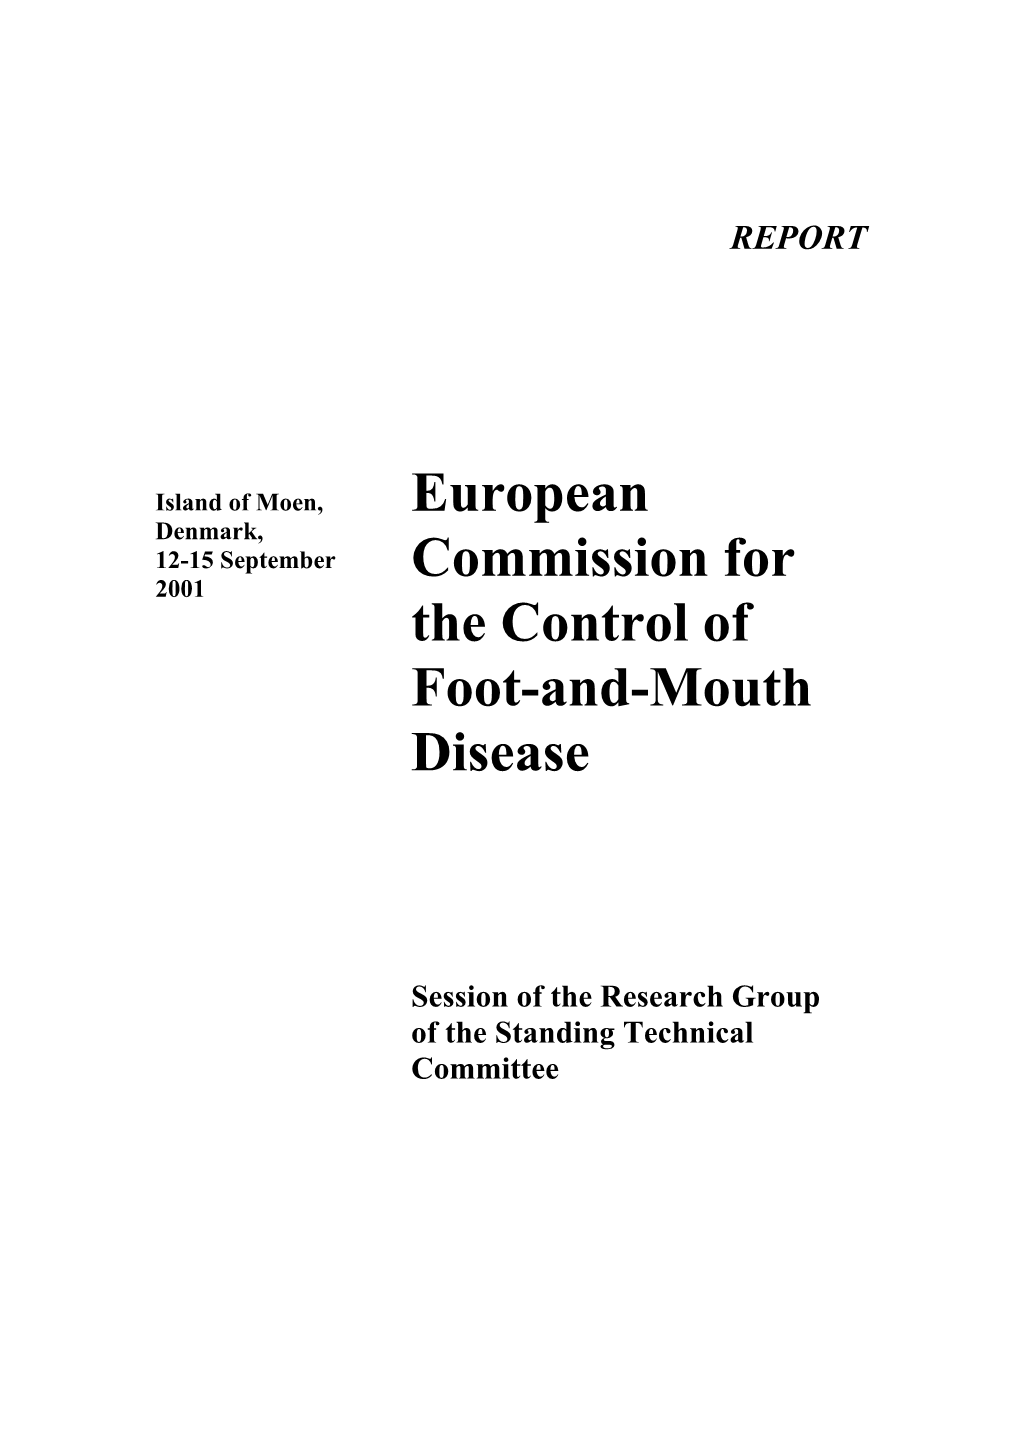 European Commission for the Control of Foot-And-Mouth Disease